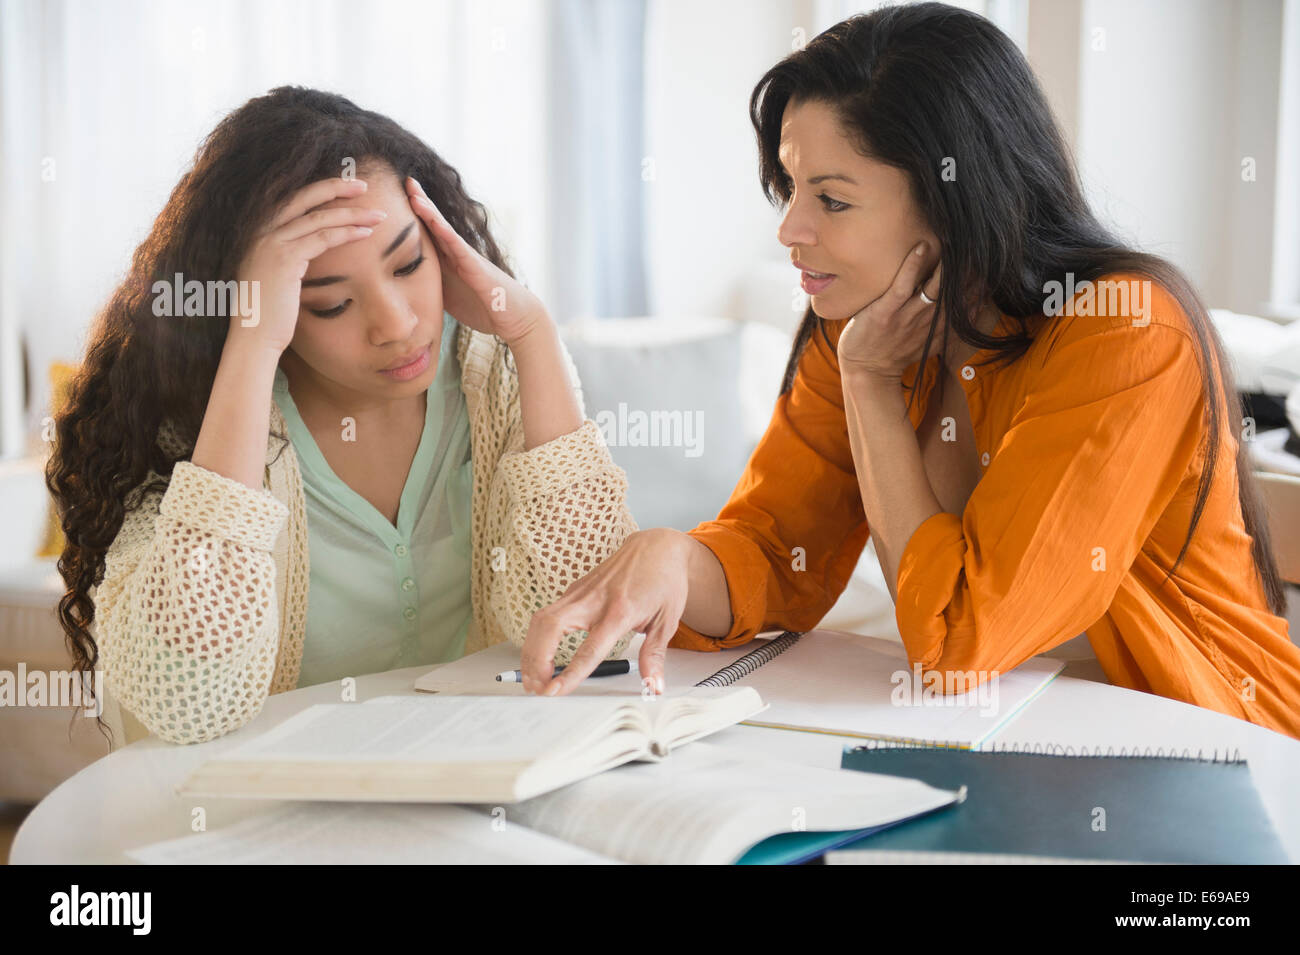 Mother helping daughter with homework Stock Photo